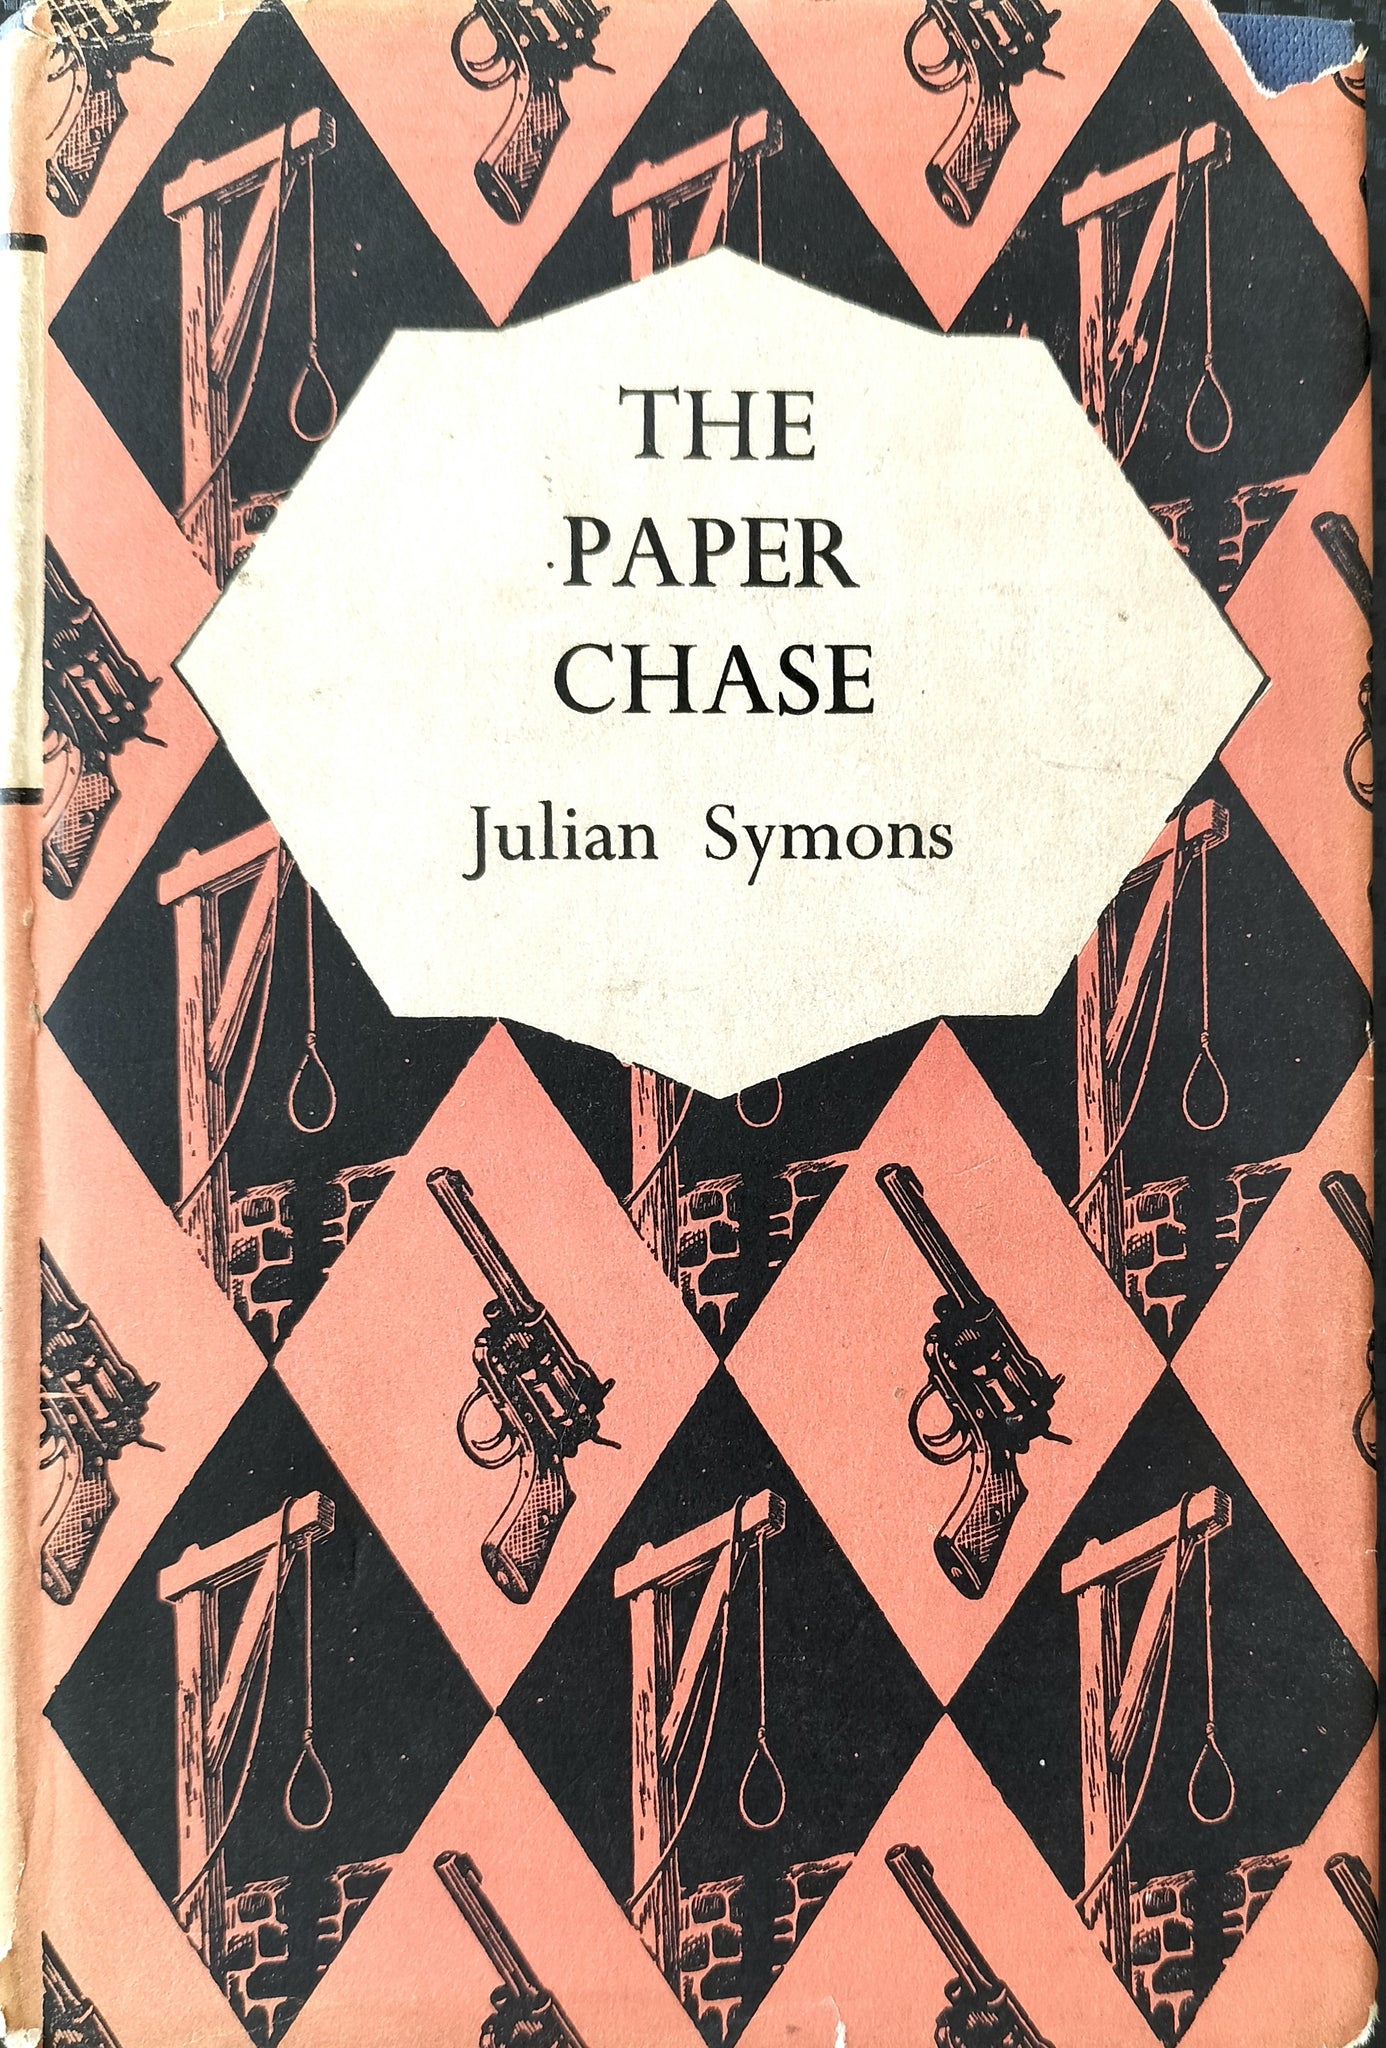 The Paper Chase by Julian Symons